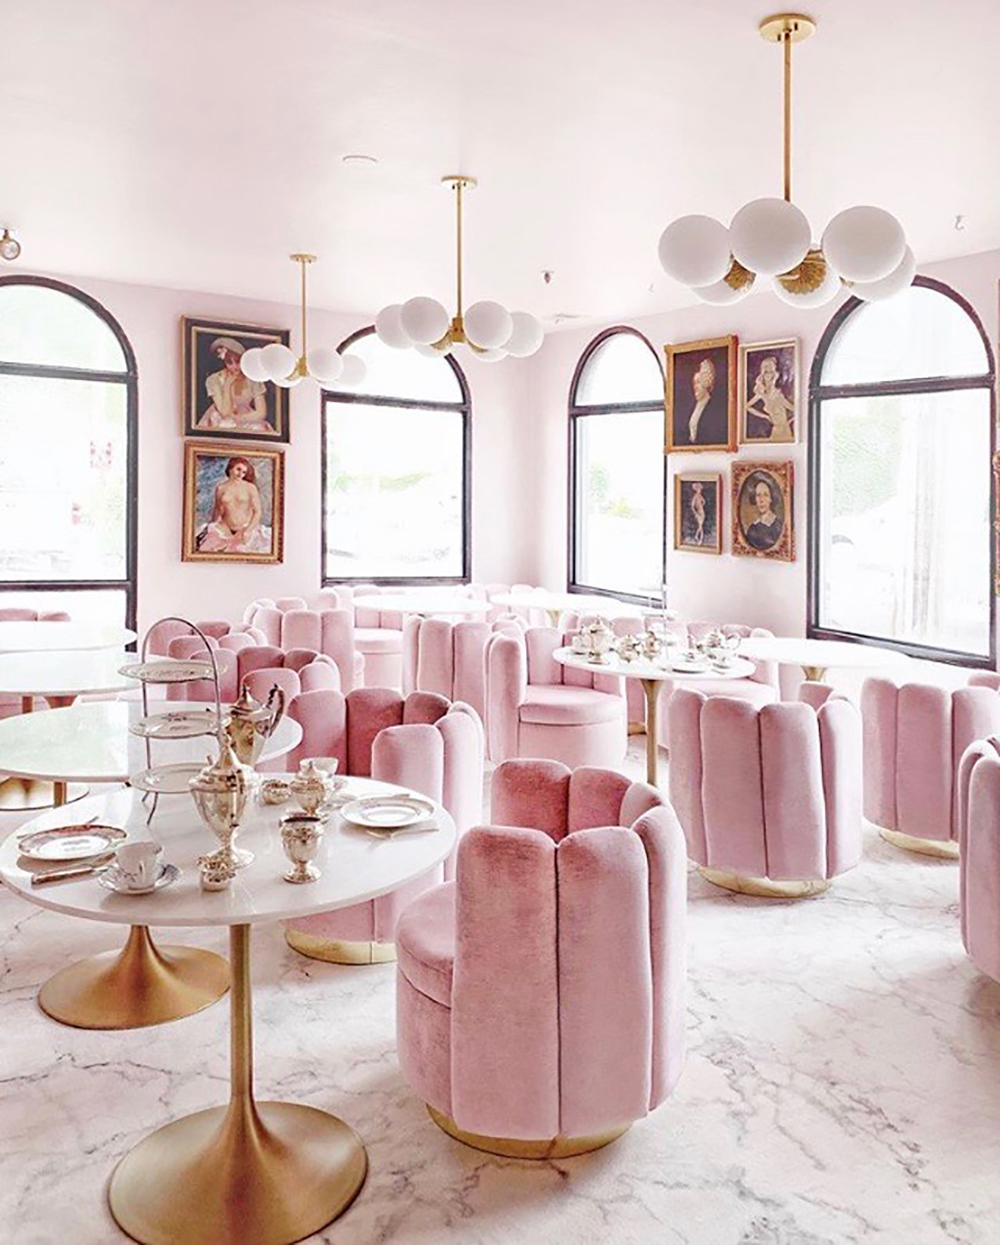 Book a room at the Garrison Inn, which is the only way to have access to this gorgeous pink tea room.